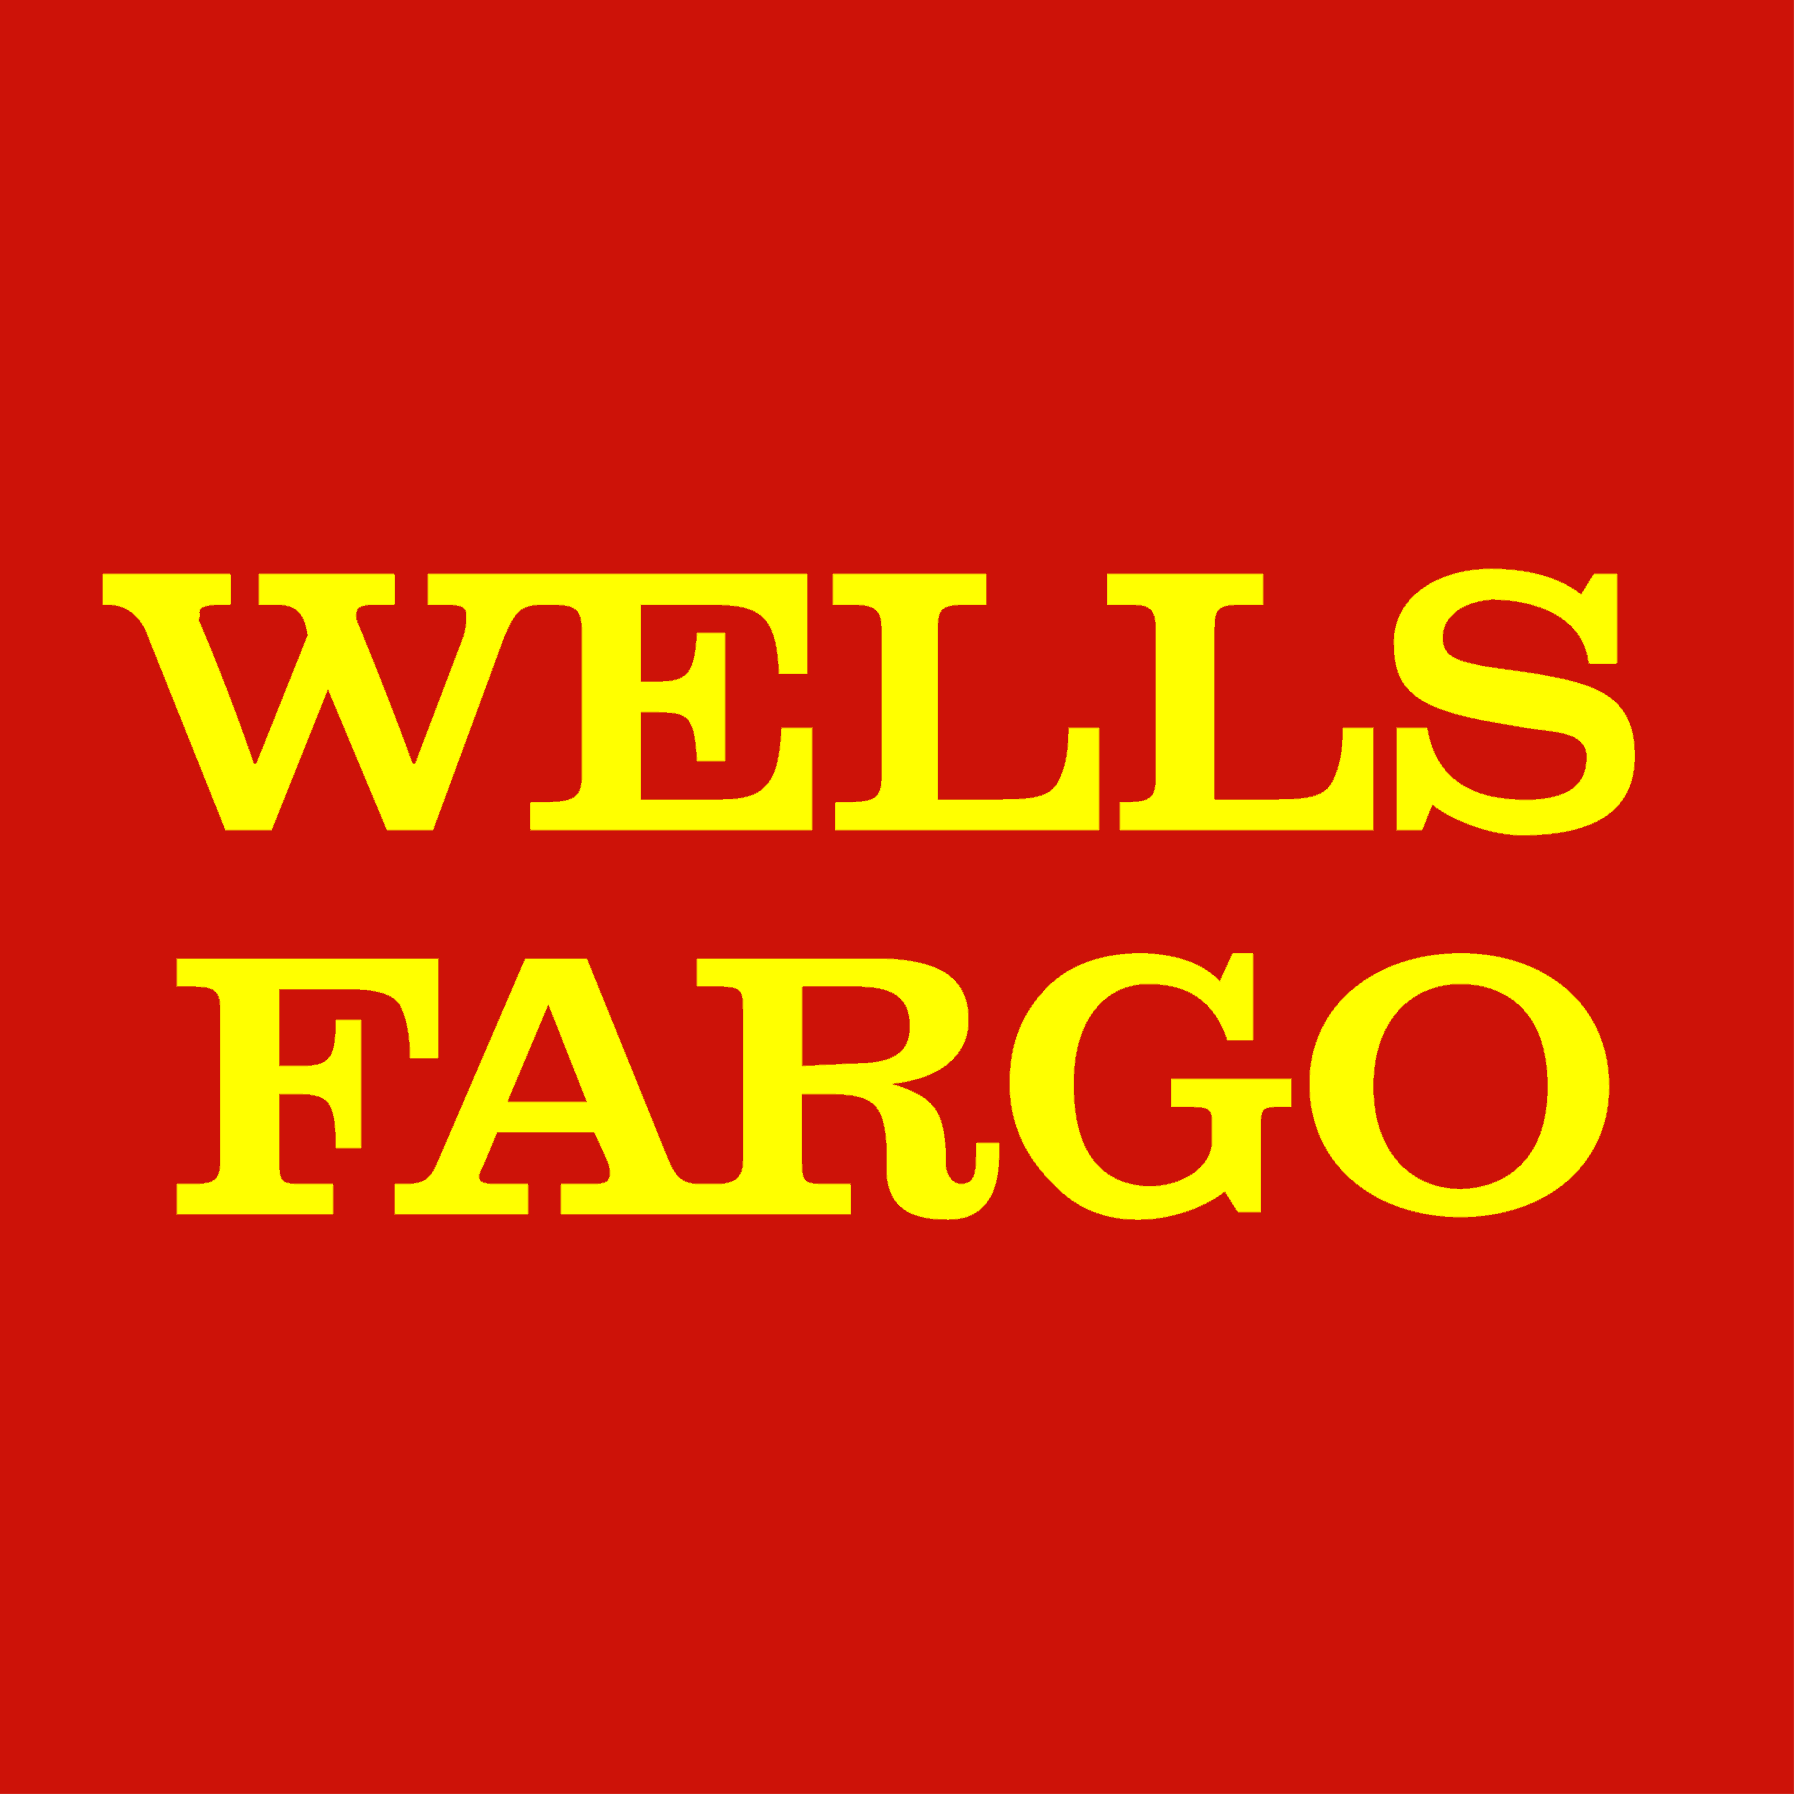 There are pros and cons to consider when getting a student loan through Wells Fargo. Find out the biggest cons in our Wells Fargo student loan review.